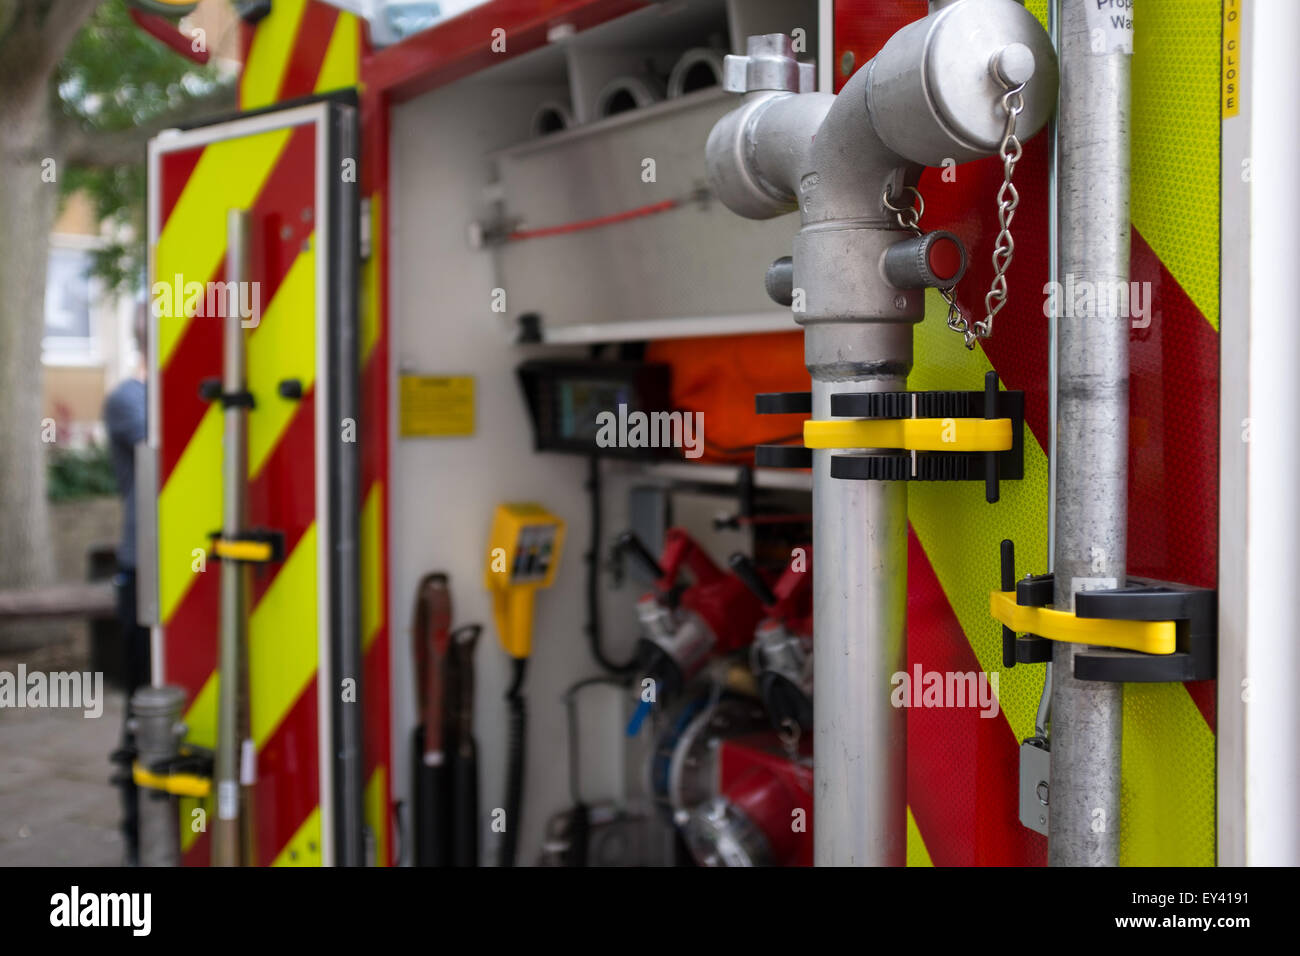 New state of the art UK fire engine appliance Stock Photo